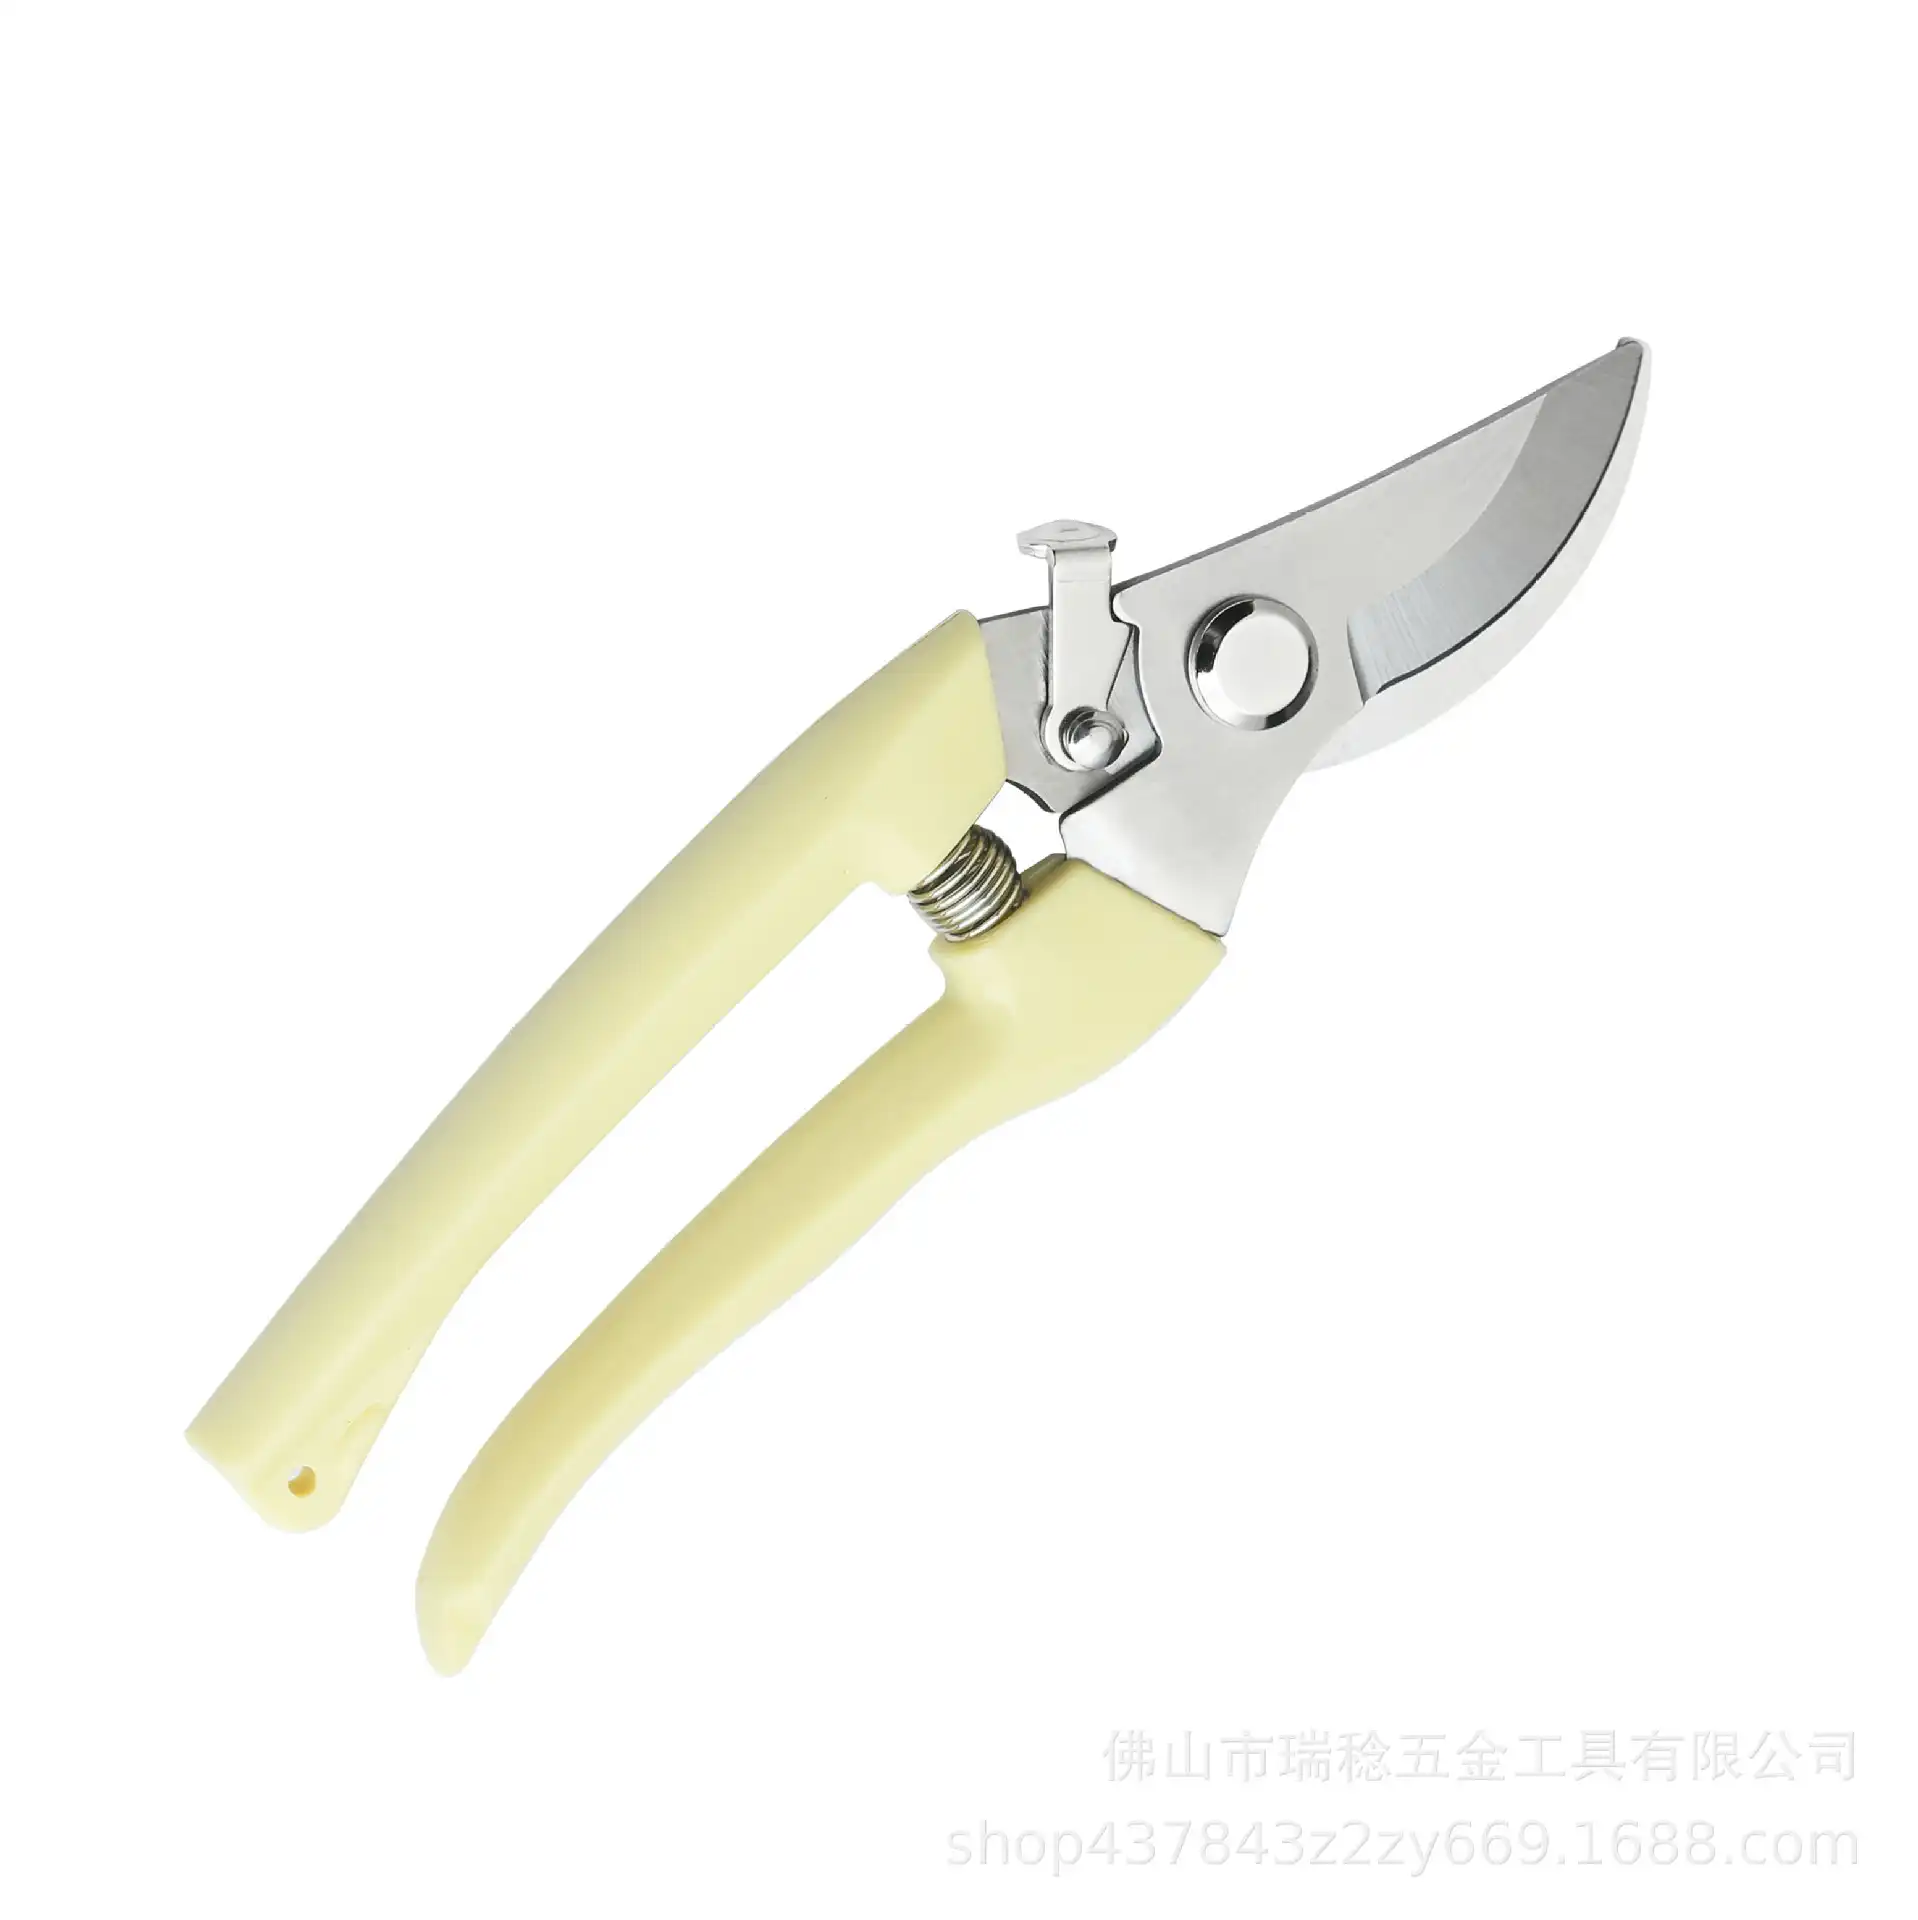 Stainless Steel Garden Pruning Shears Flower Scissors For Stems Cutting Plants Trimming Tools